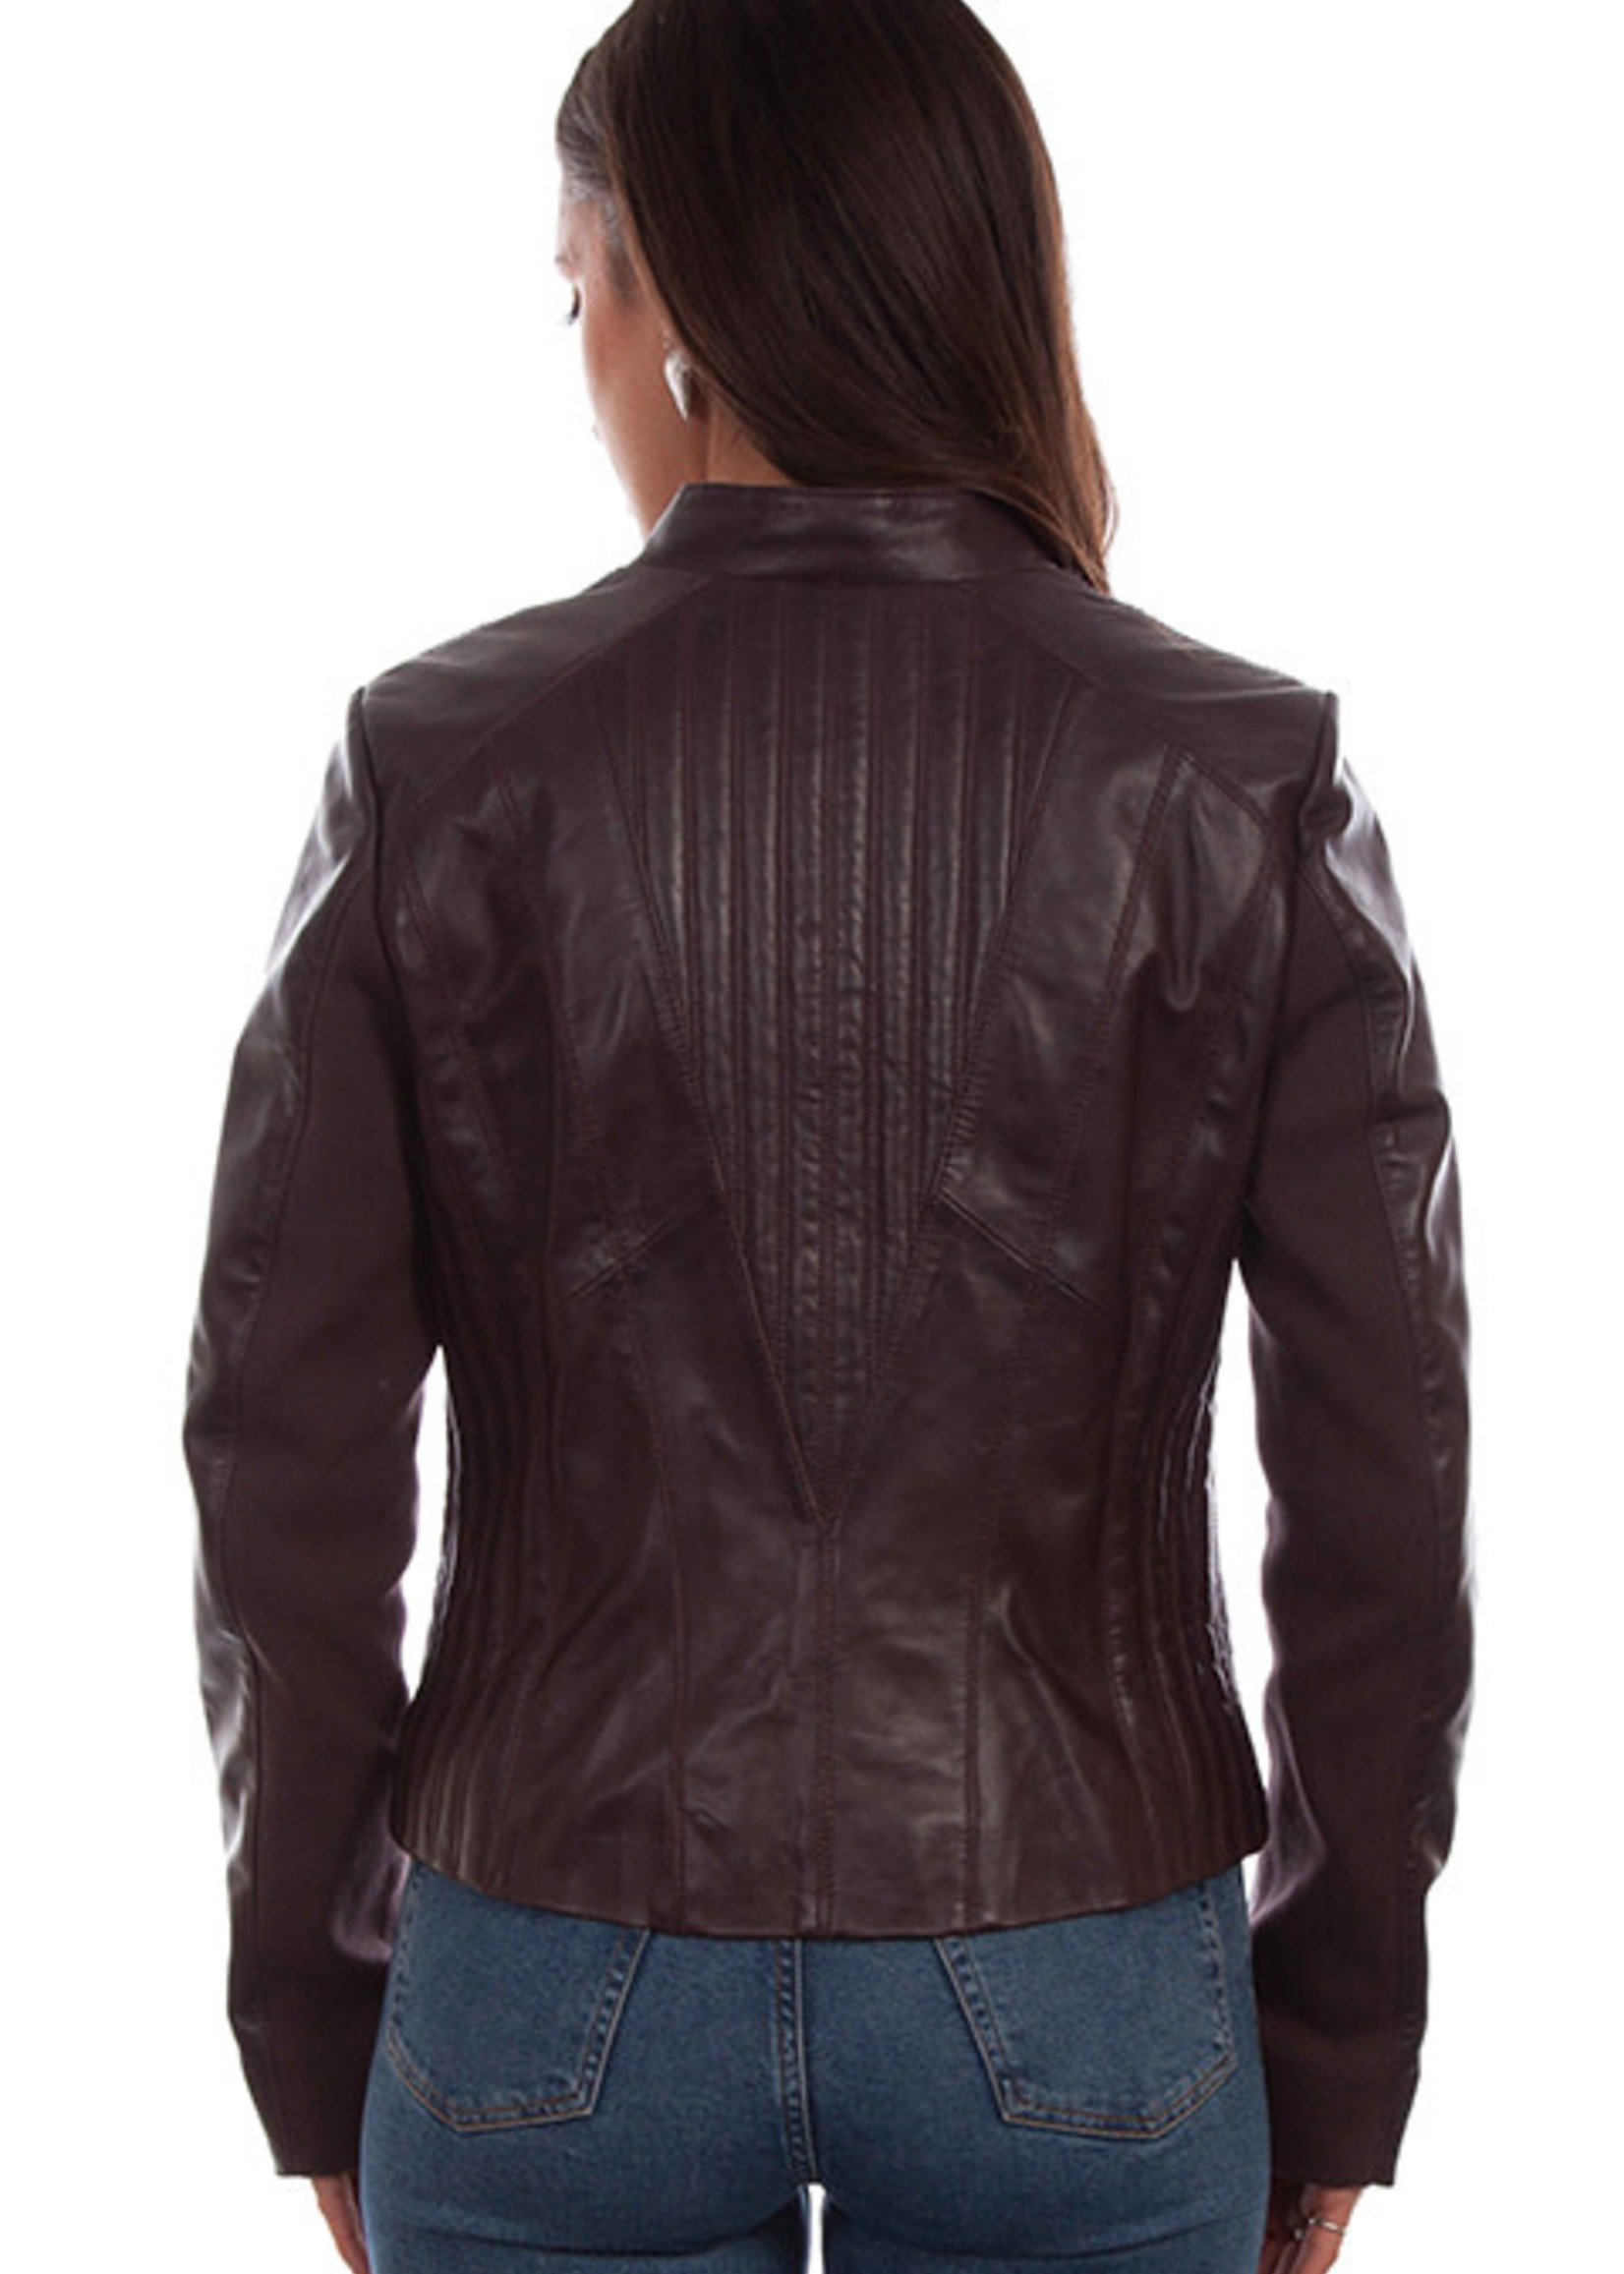 Scully Leather Purple Zip up Jacket